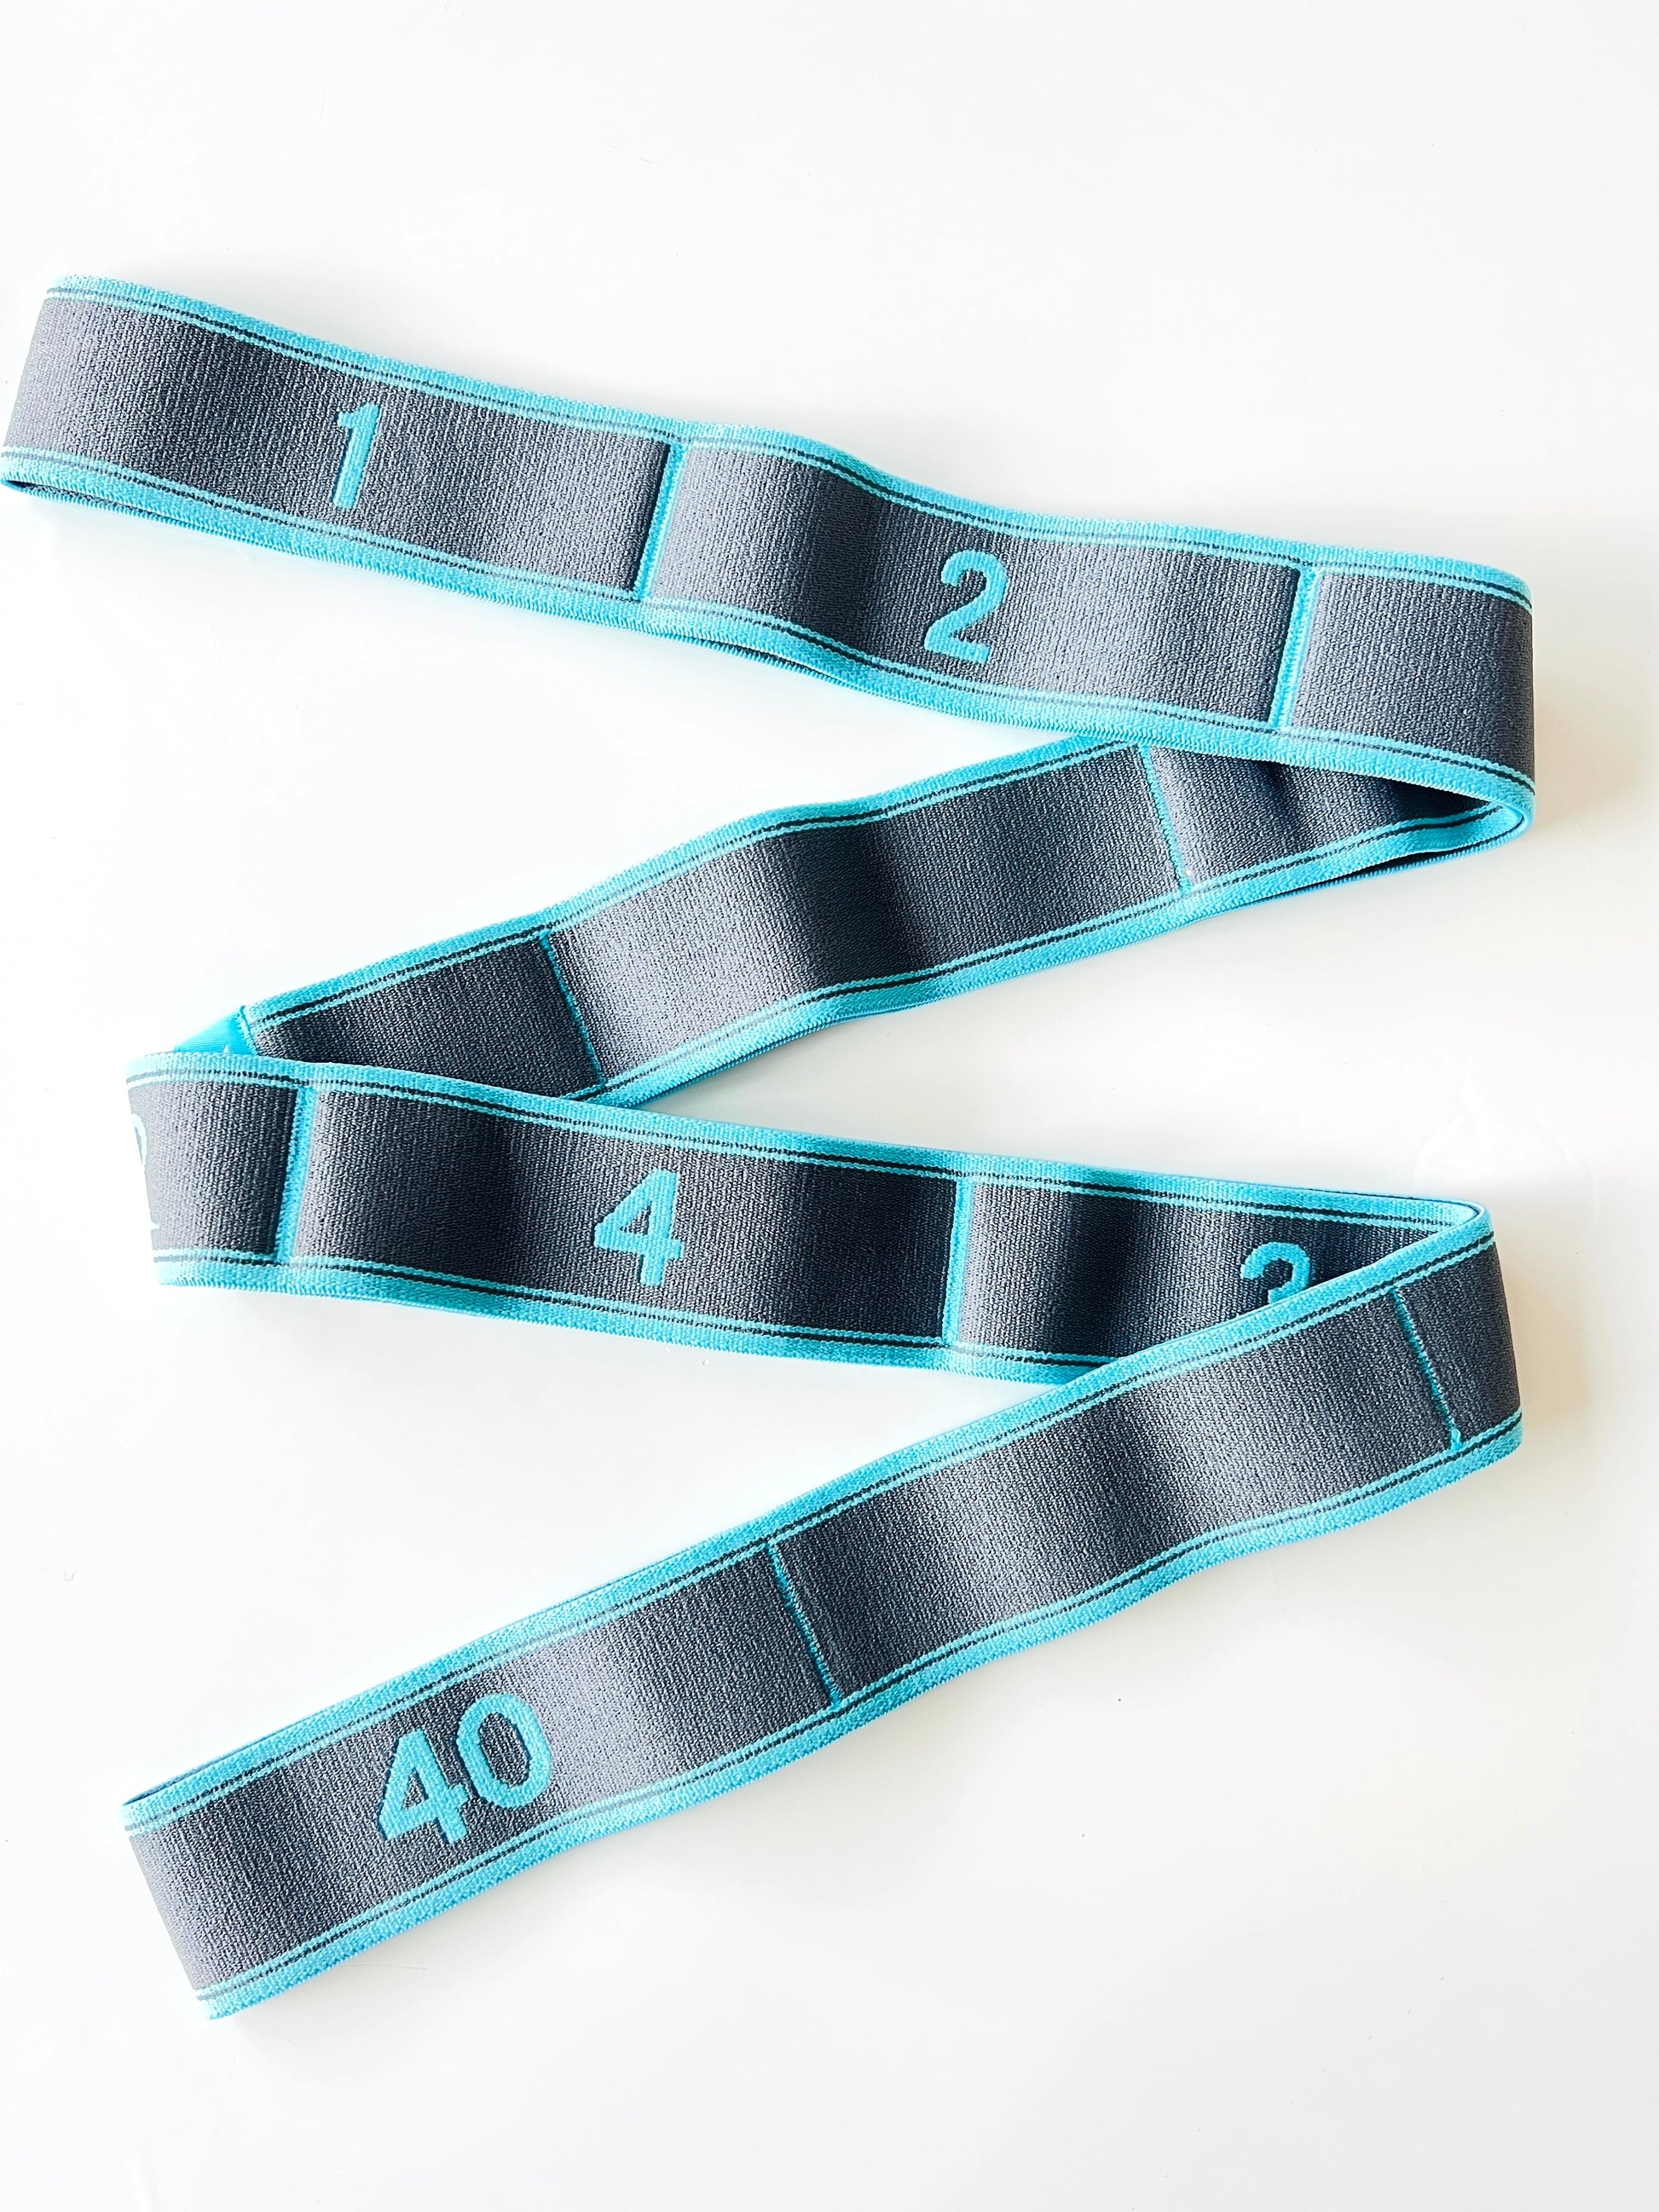 Multi Function Flexibility Resistance Band - Grey and Blue from The Collective Dancewear